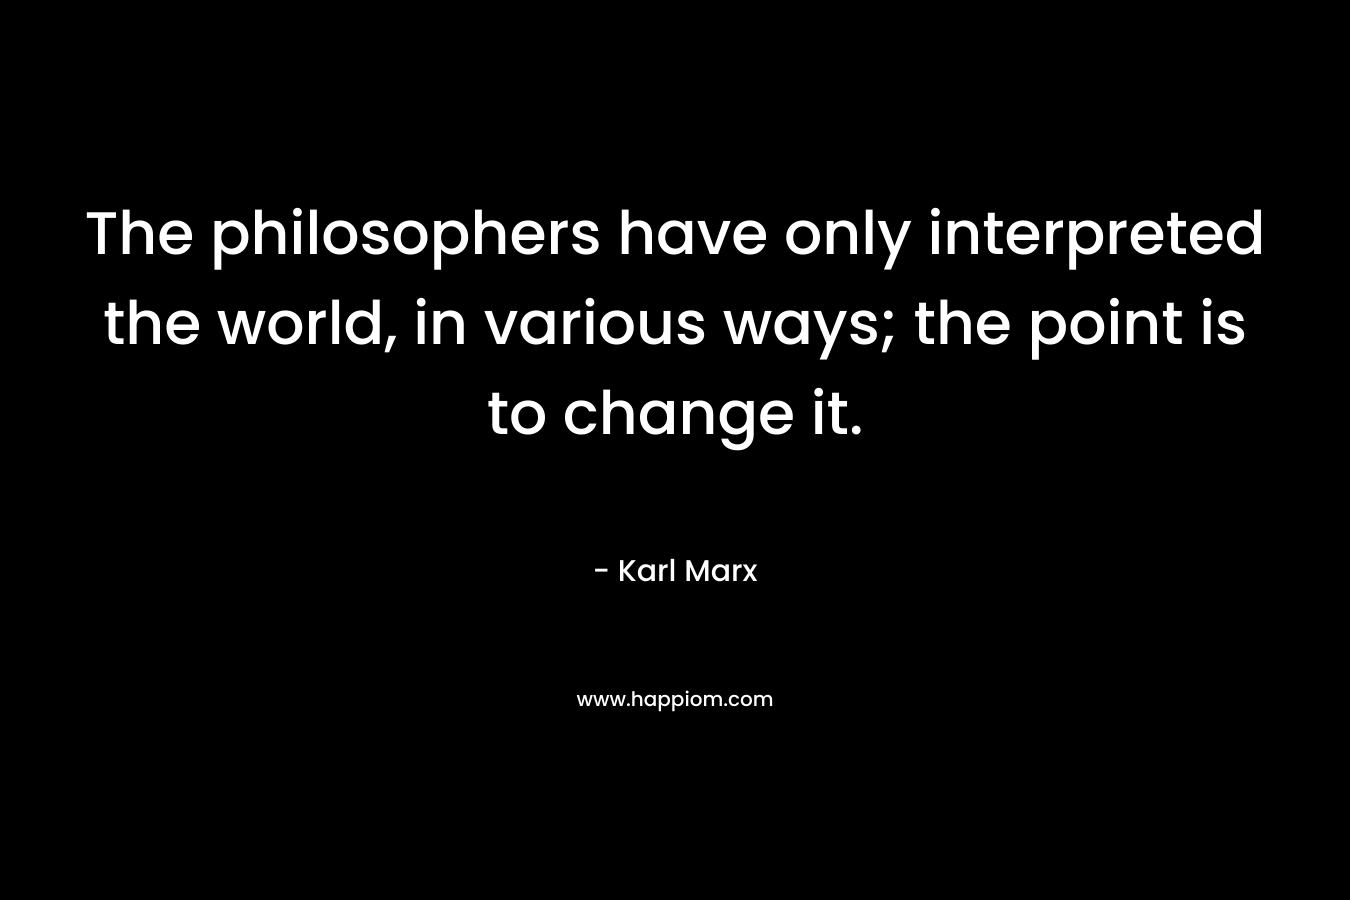 The philosophers have only interpreted the world, in various ways; the point is to change it. – Karl Marx